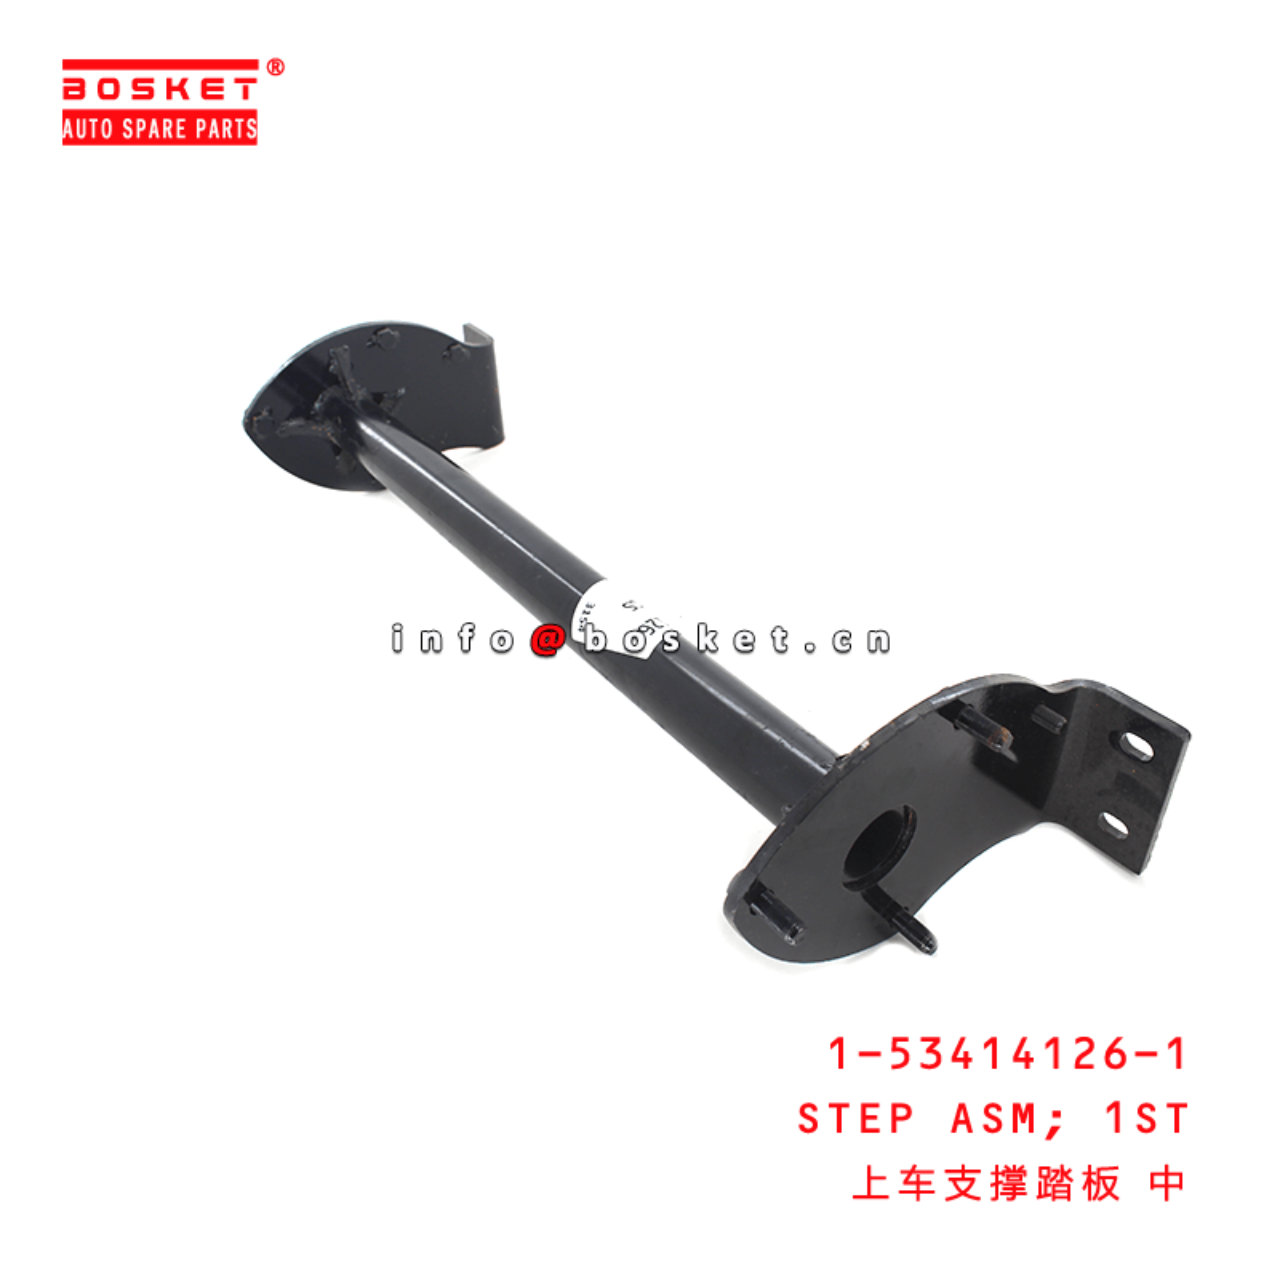  1-53414126-1 First Step Assembly 1534141261 Suitable for ISUZU FVR34 